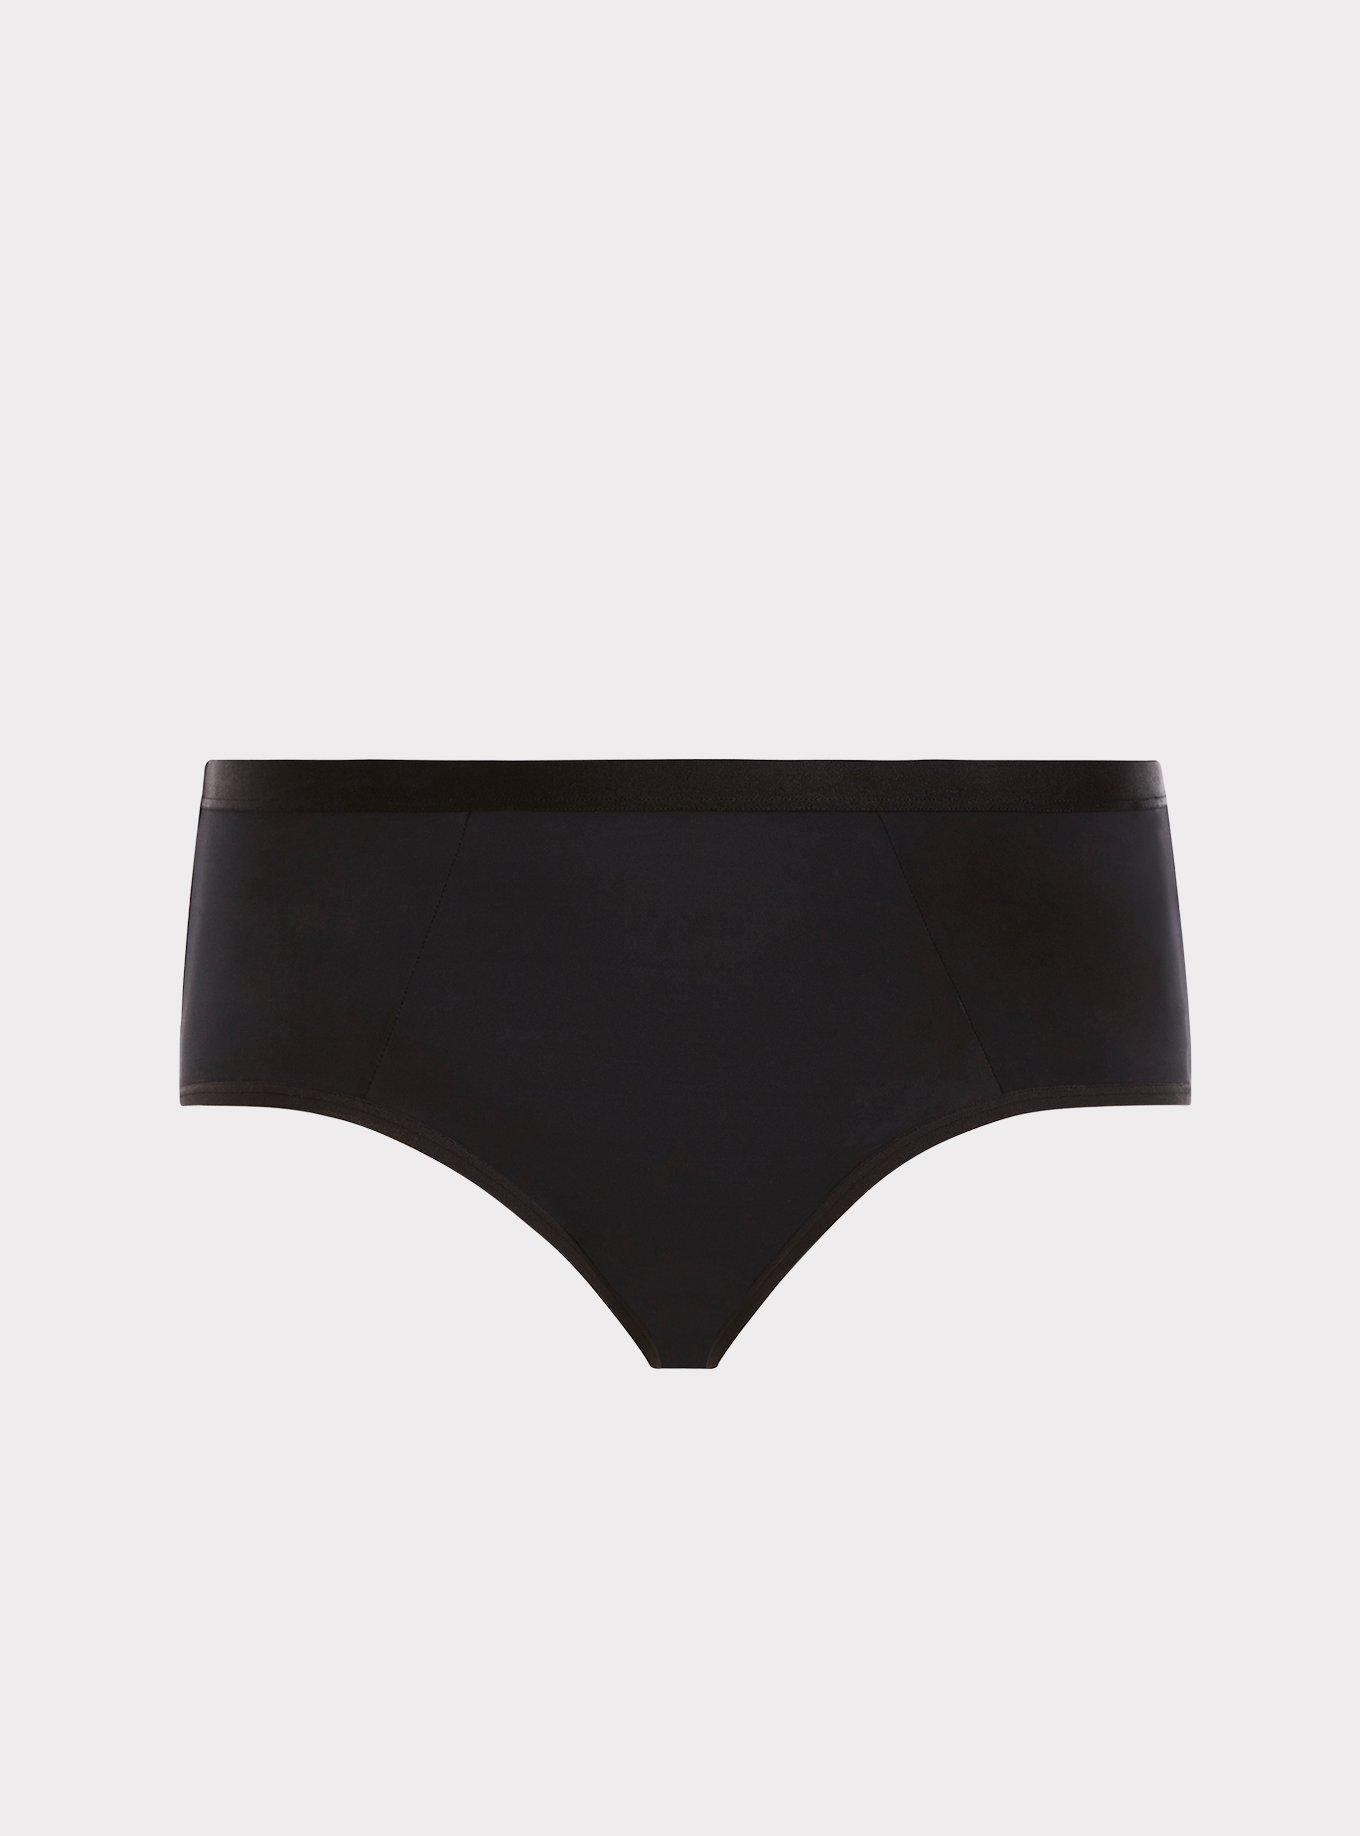 9 types of knickers every Irish girl has in her drawer · The Daily Edge